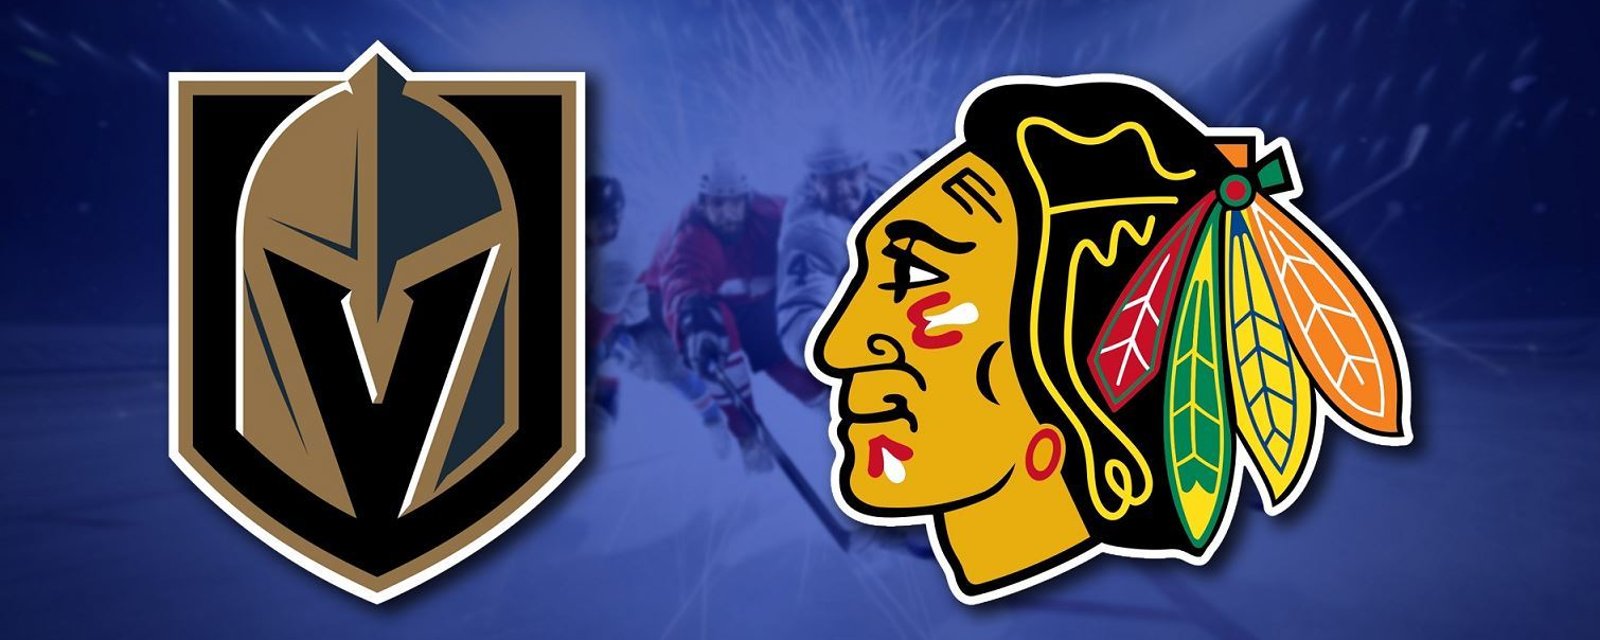 Breaking: Golden Knights and Blackhawks have made a 1 for 1 trade.